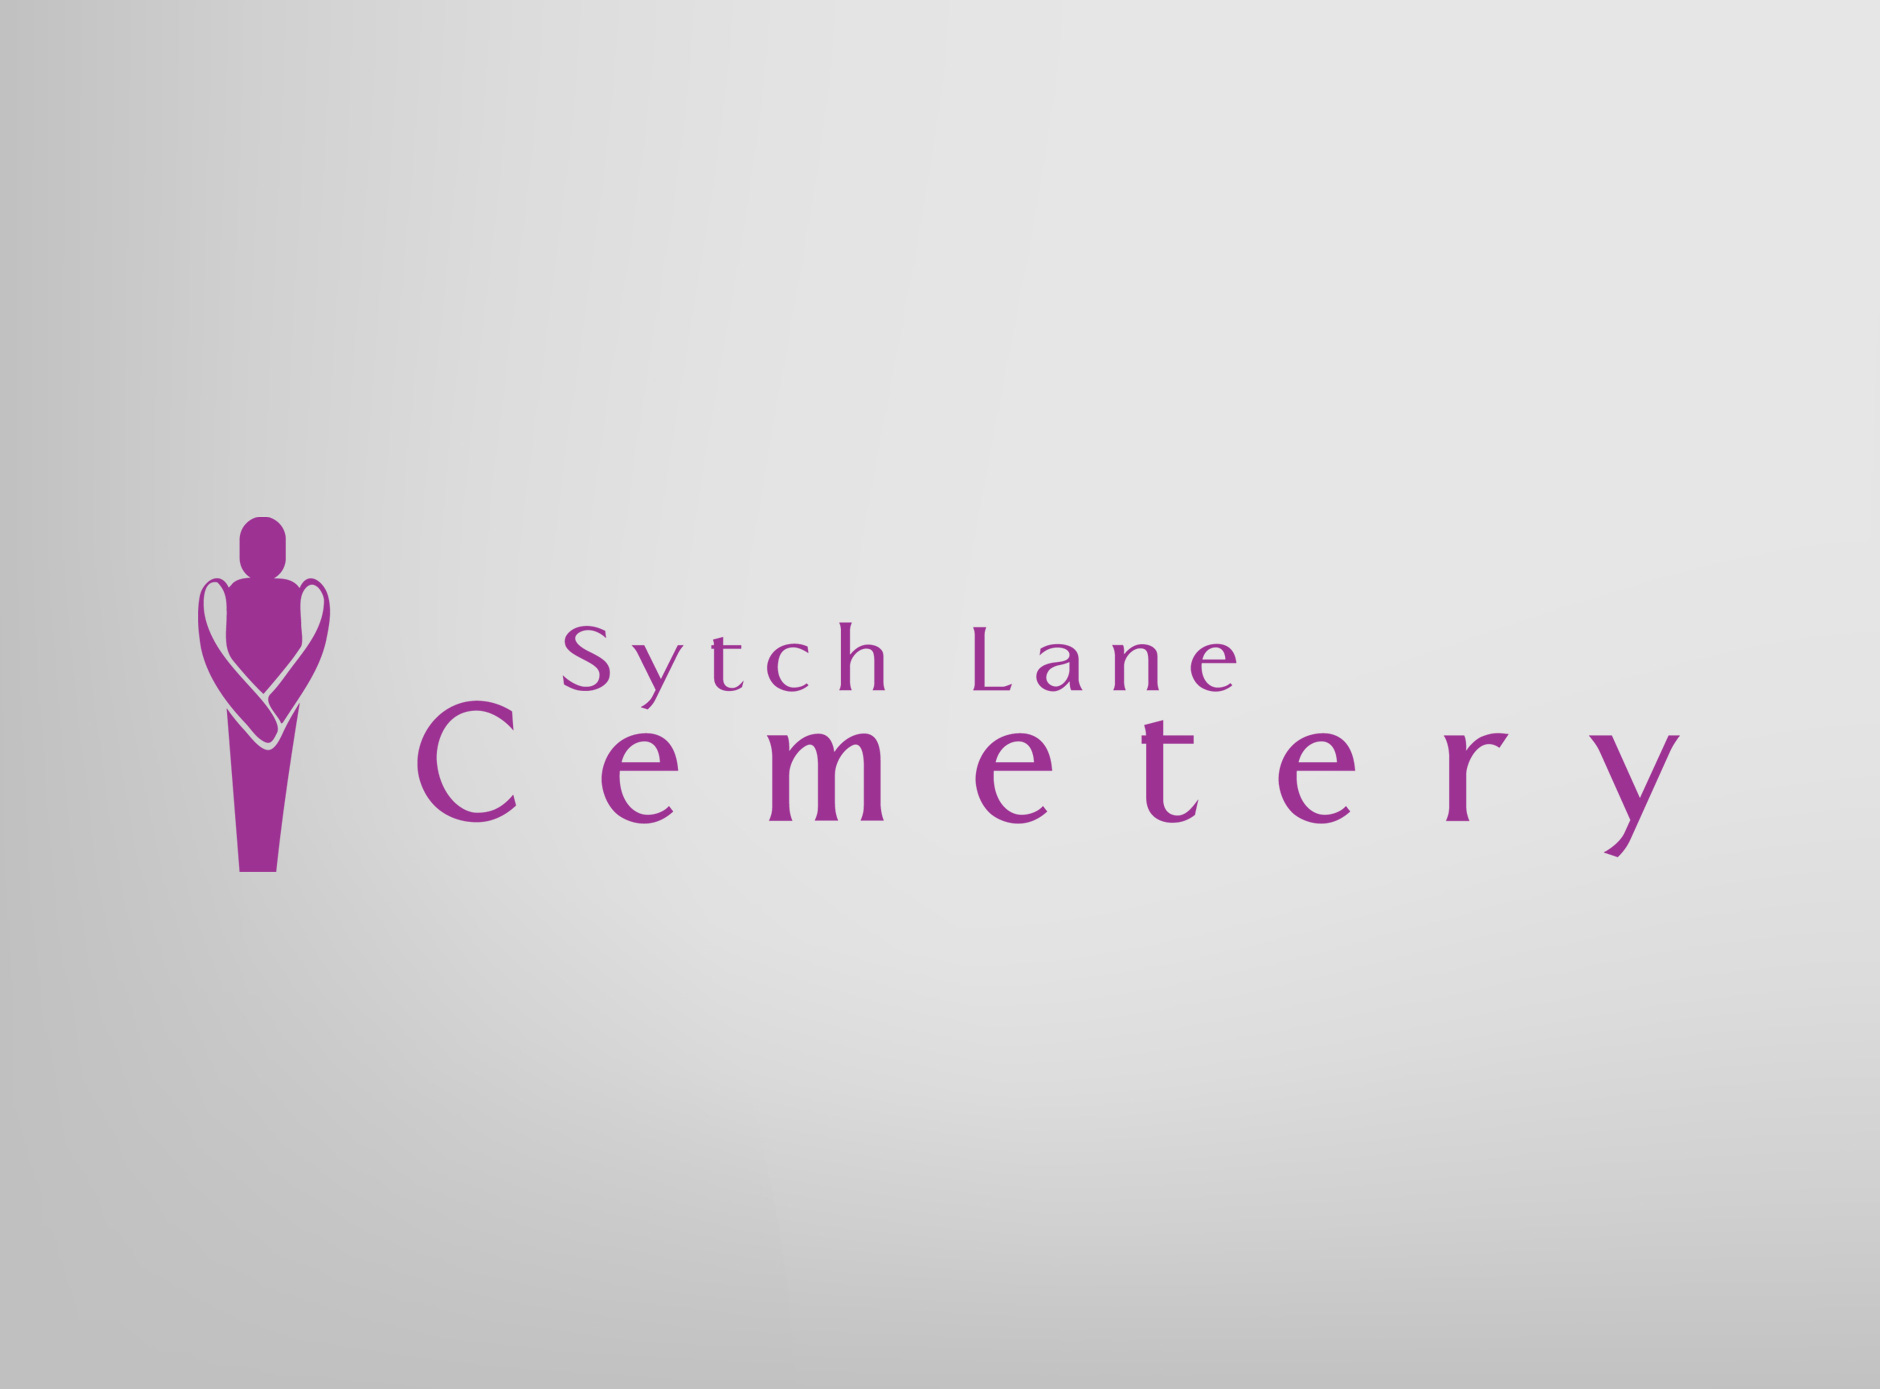 Sytch Lane Cemetery design for print